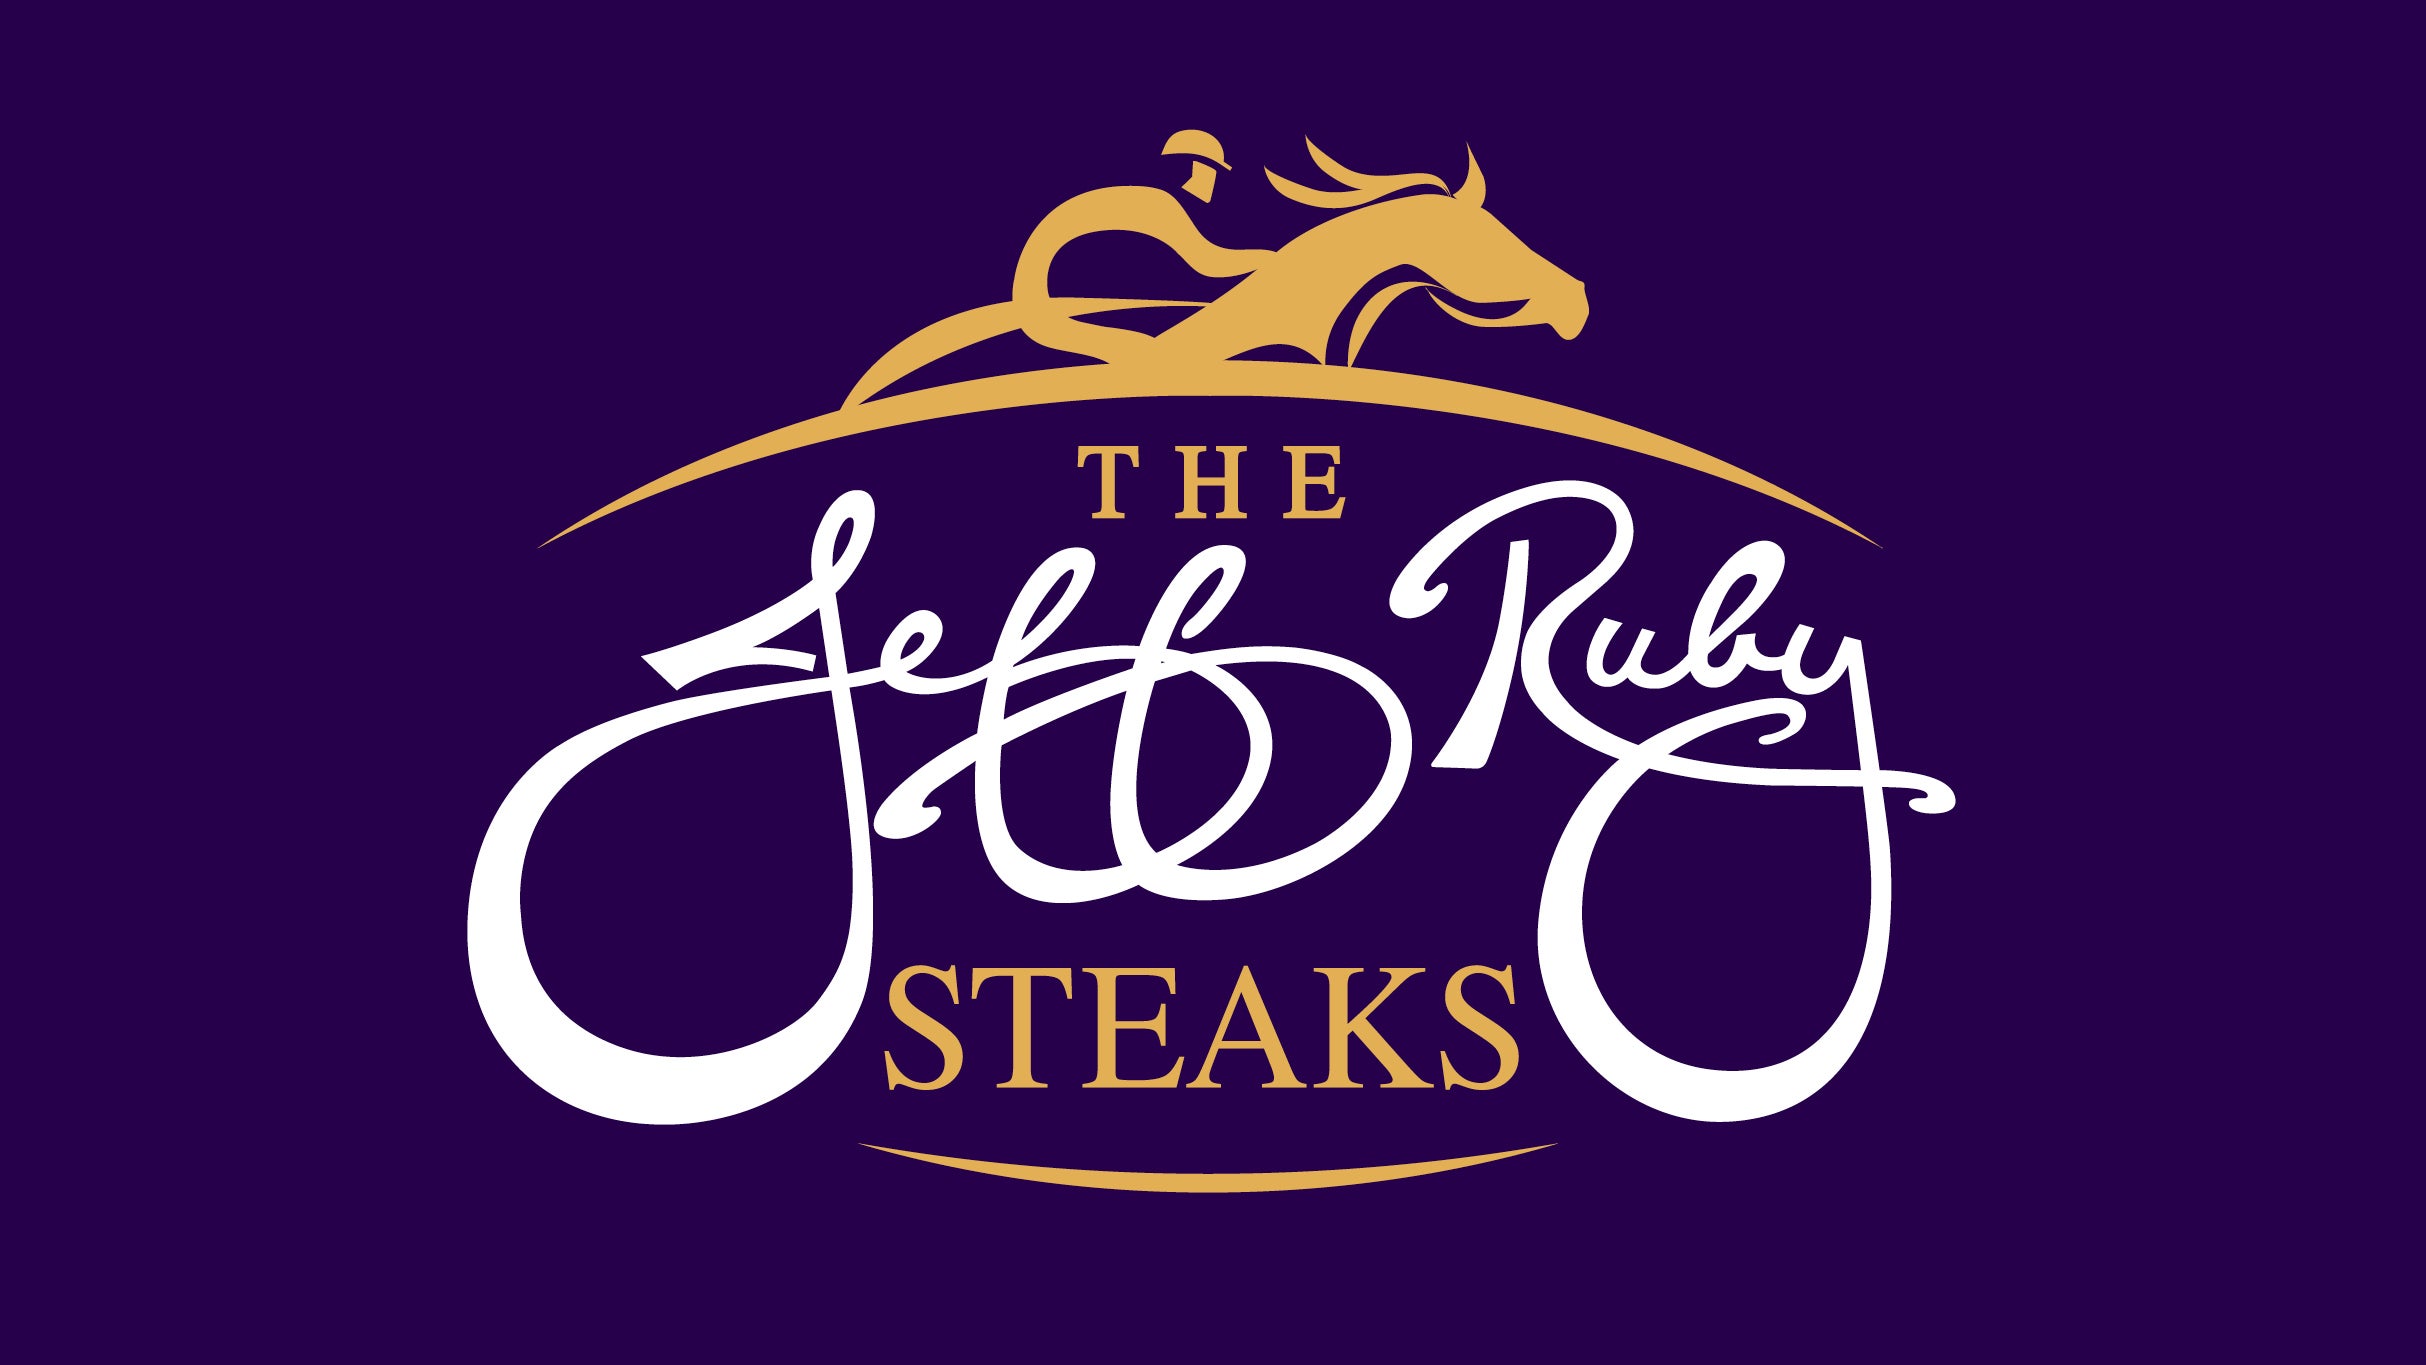 Jeff Ruby Steaks in Florence promo photo for Turfway Park Friends & Family  presale offer code